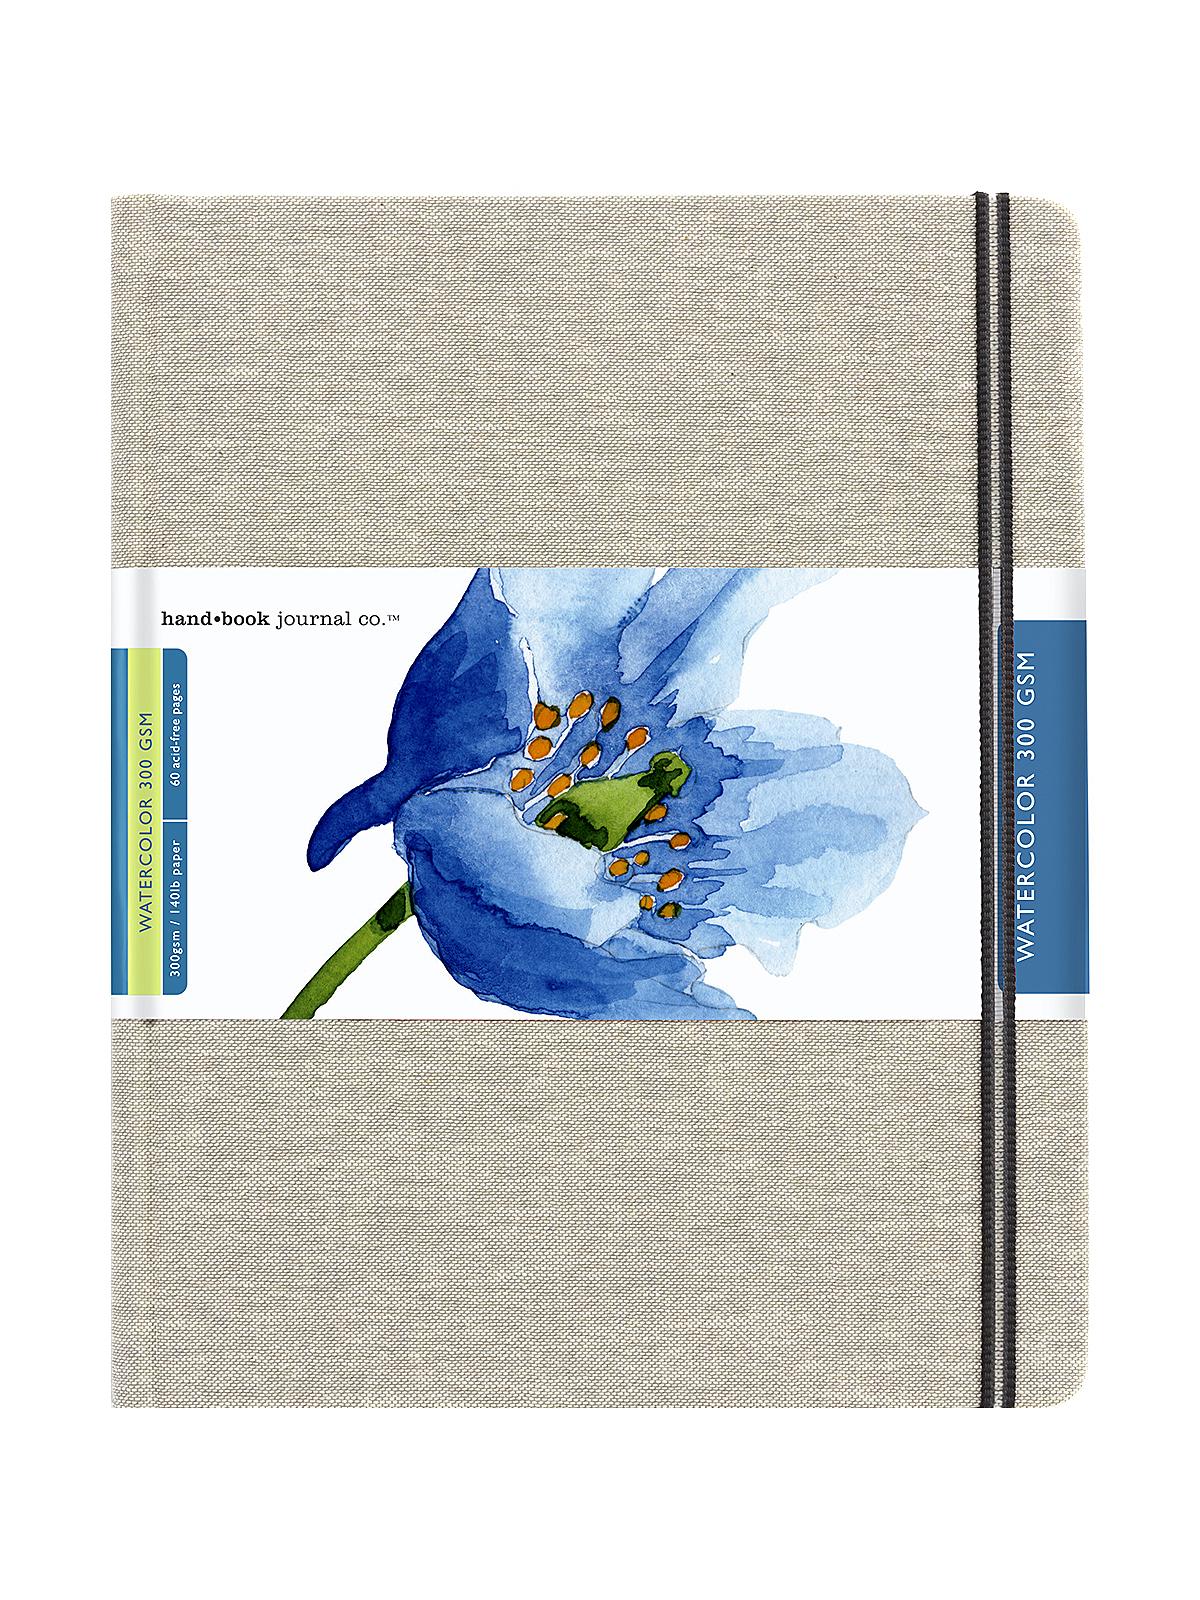 Travelogue Watercolor Journals Grand Portrait 10 1 2 In. X 8 1 4 In. 140 Lb. (300 Gsm)